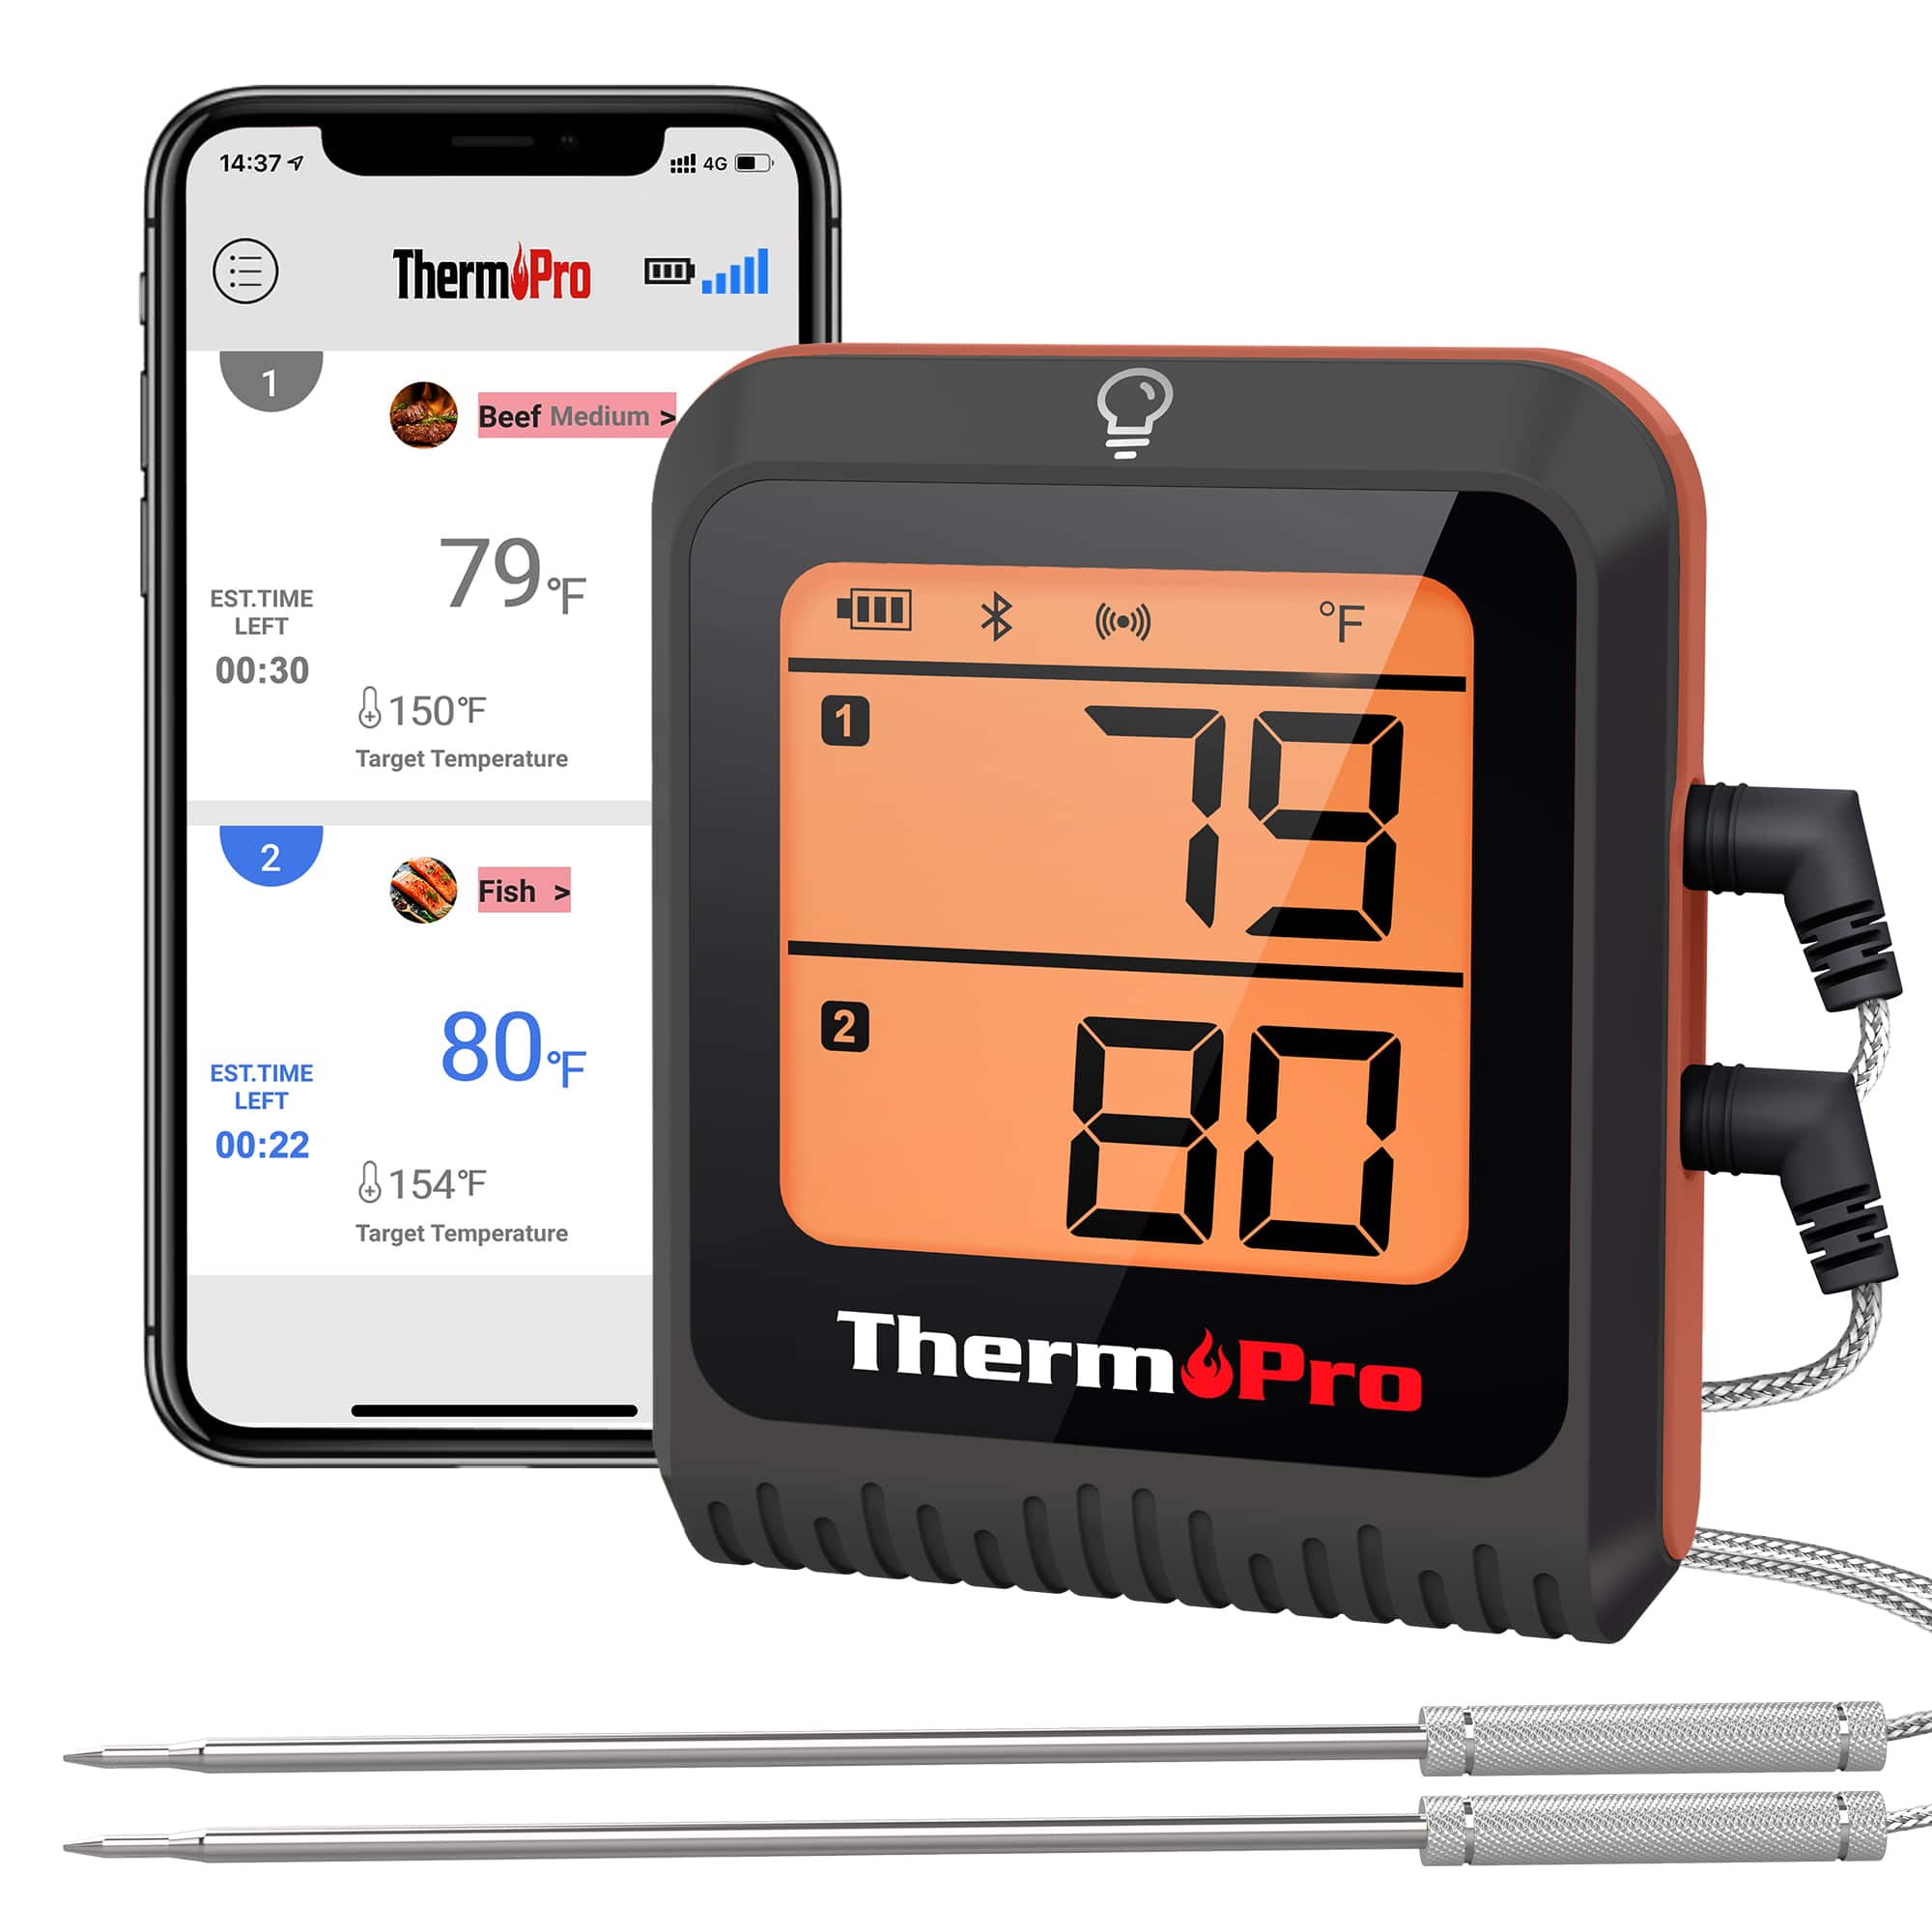 ThermoPro TP28 500FT Long Range Wireless Meat Thermometer with